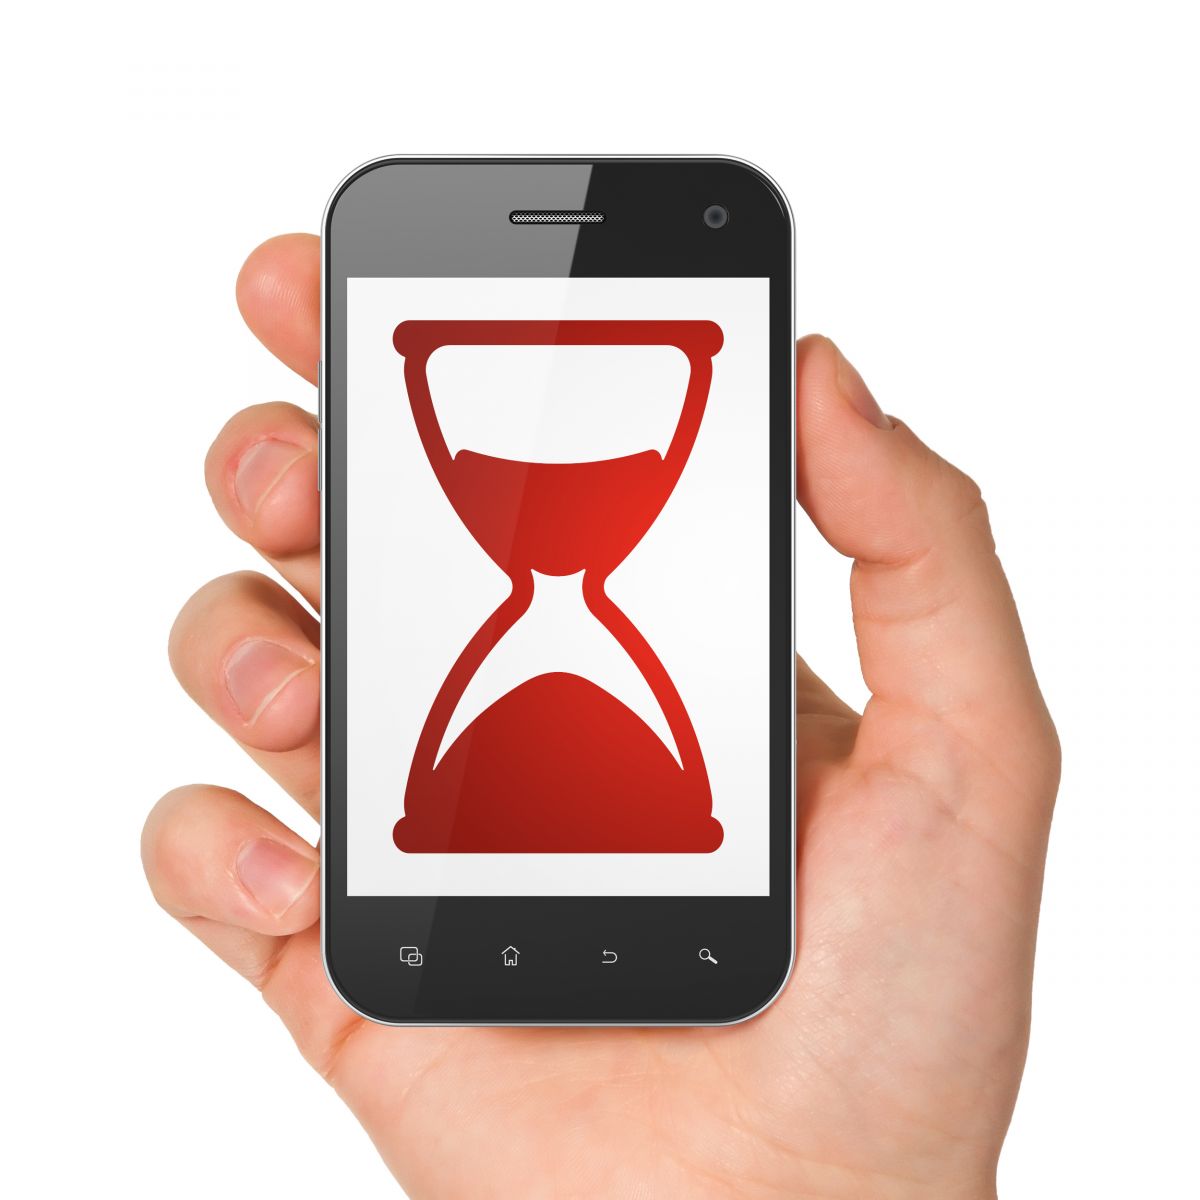 Mobile phone will hour glass on screen